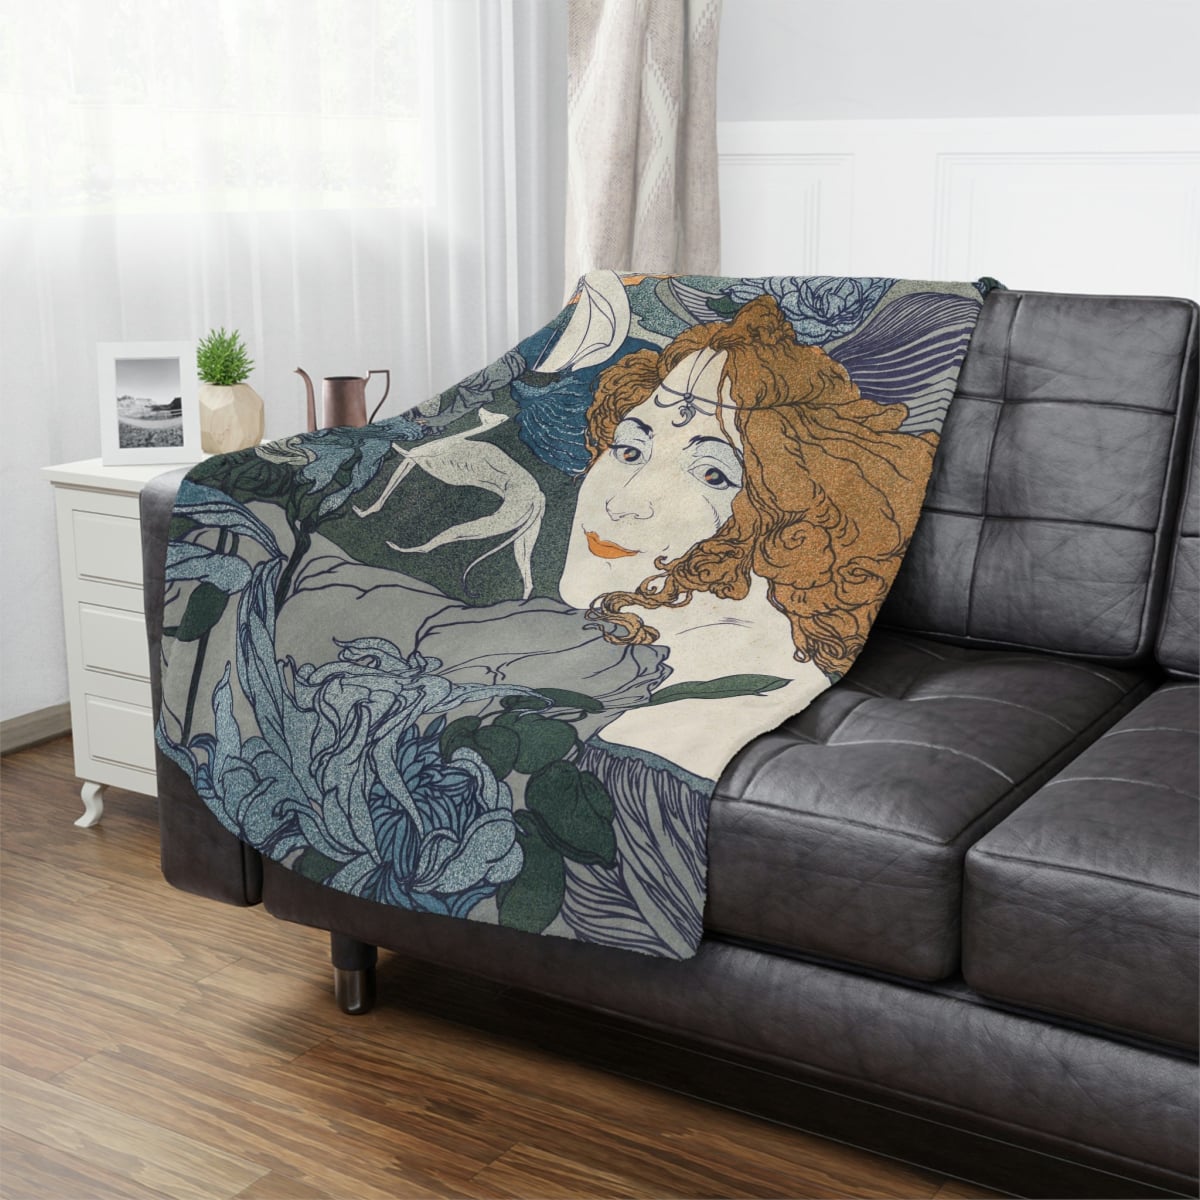 Interior Design Blanket with Timeless Beauty Art Reproduction